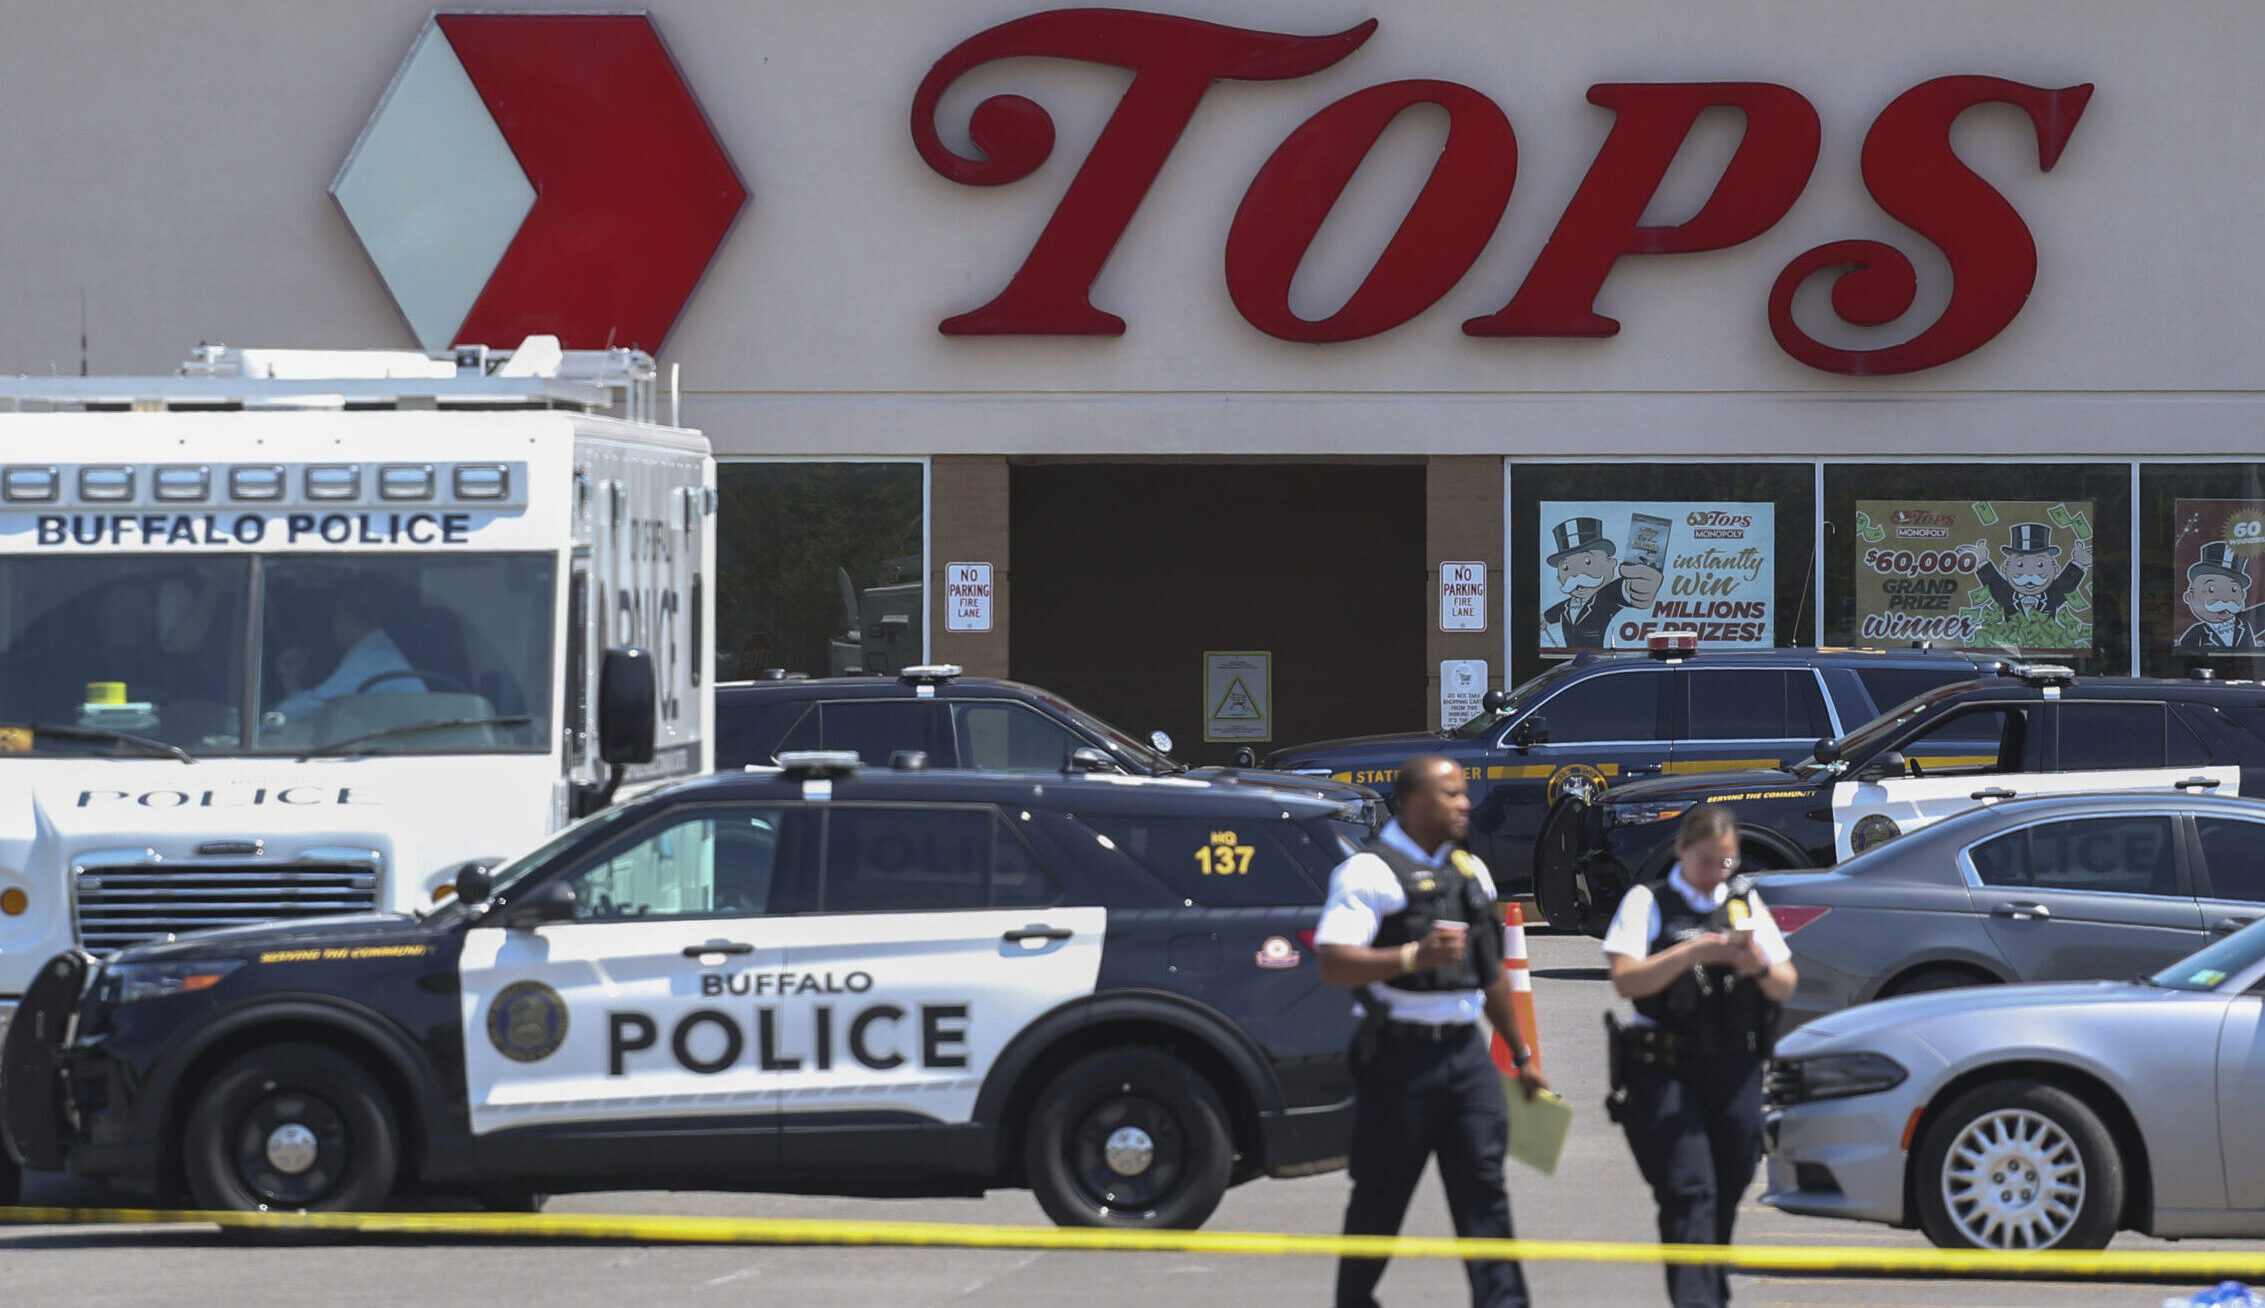 Police walk outside the Tops grocery store on Sunday, May 15, 2022, in Buffalo, New York. Payton Gendron was sentenced to life in prison Wednesday, Feb. 15, 2023, for killing 10 people at a Buffalo supermarket in an attack fueled by racist conspiracy theories he encountered online. Photo credit: Joshua Bessex, The Associated Press